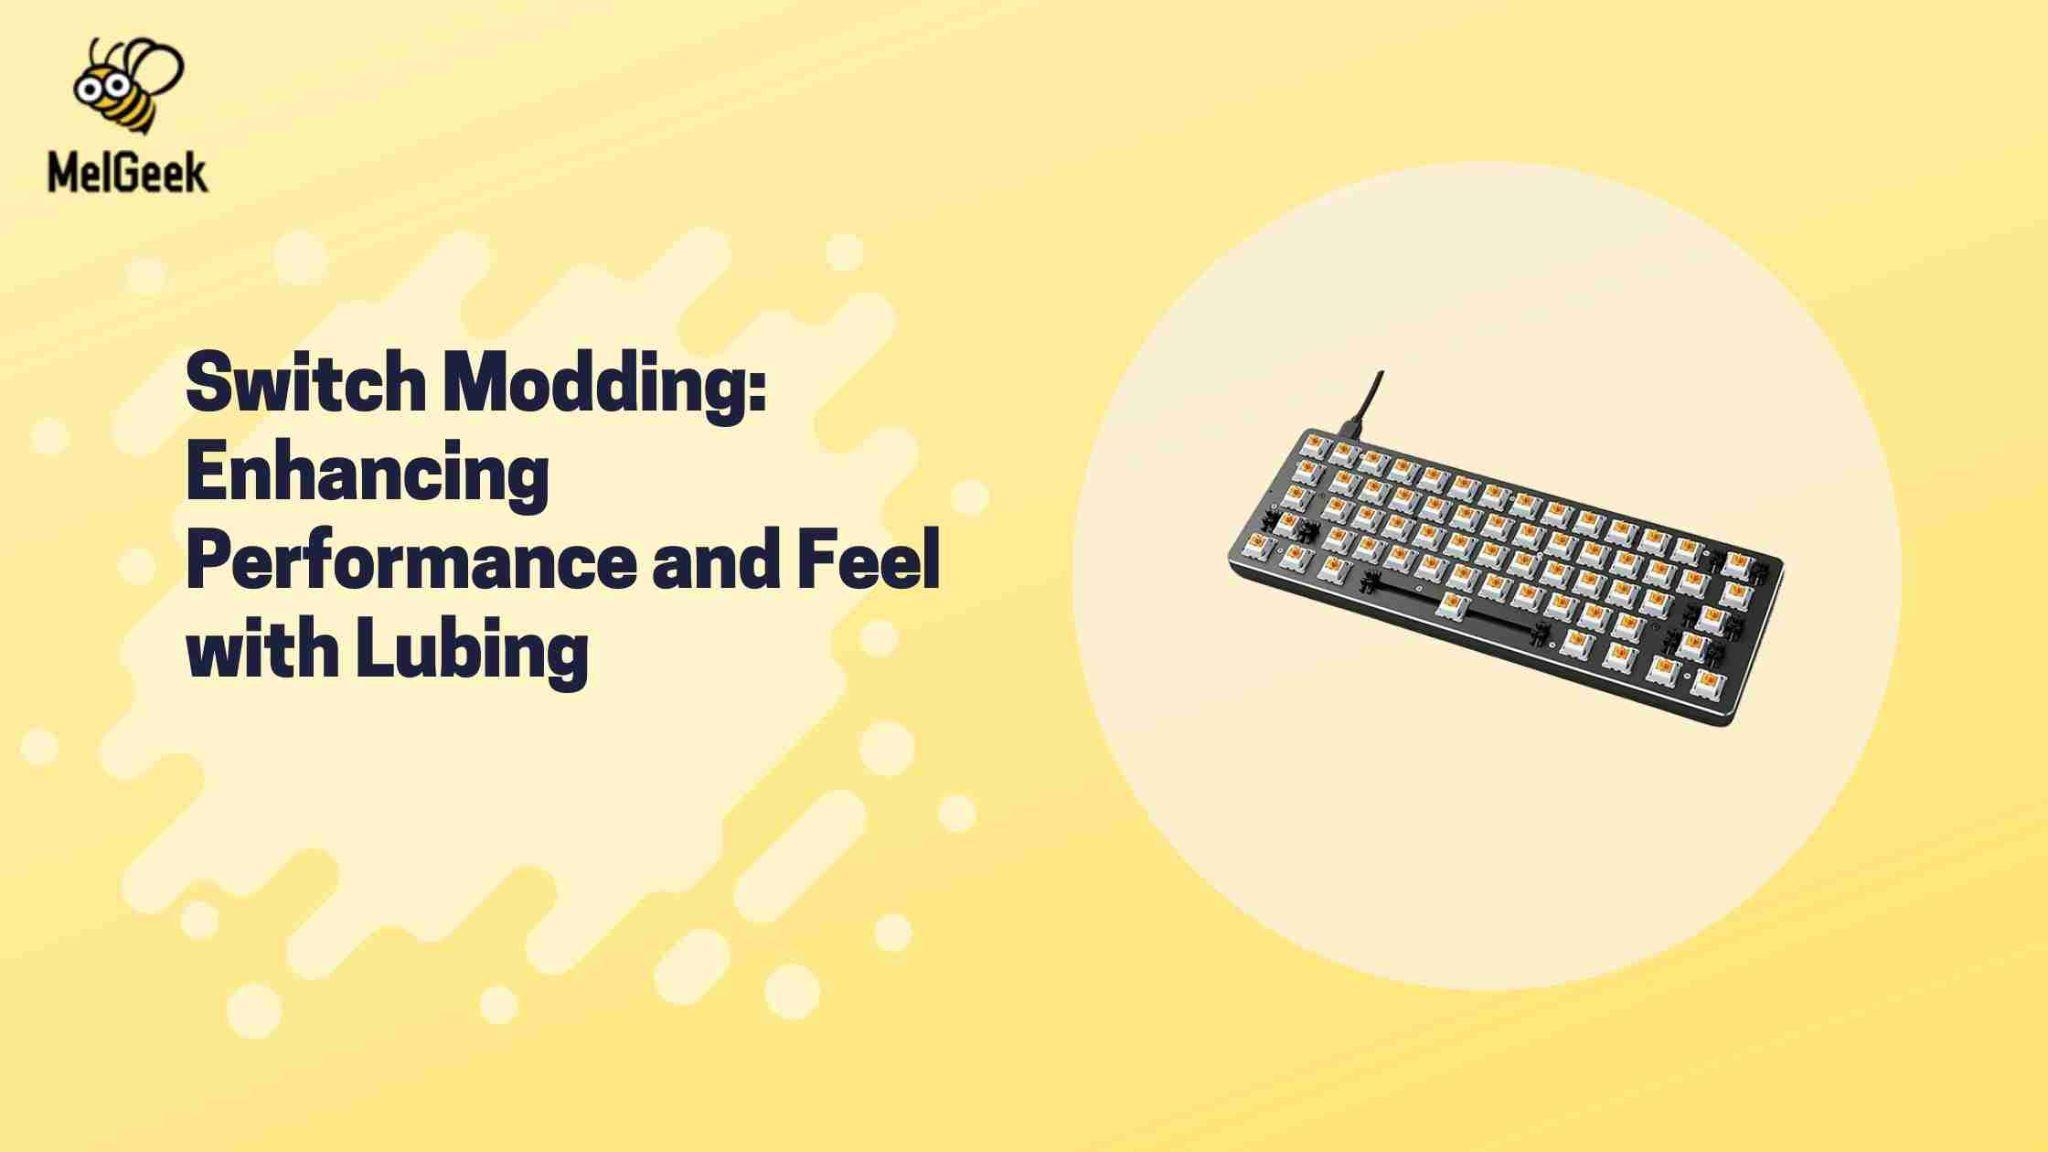 Switch Modding: Enhancing Performance and Feel with Lubing